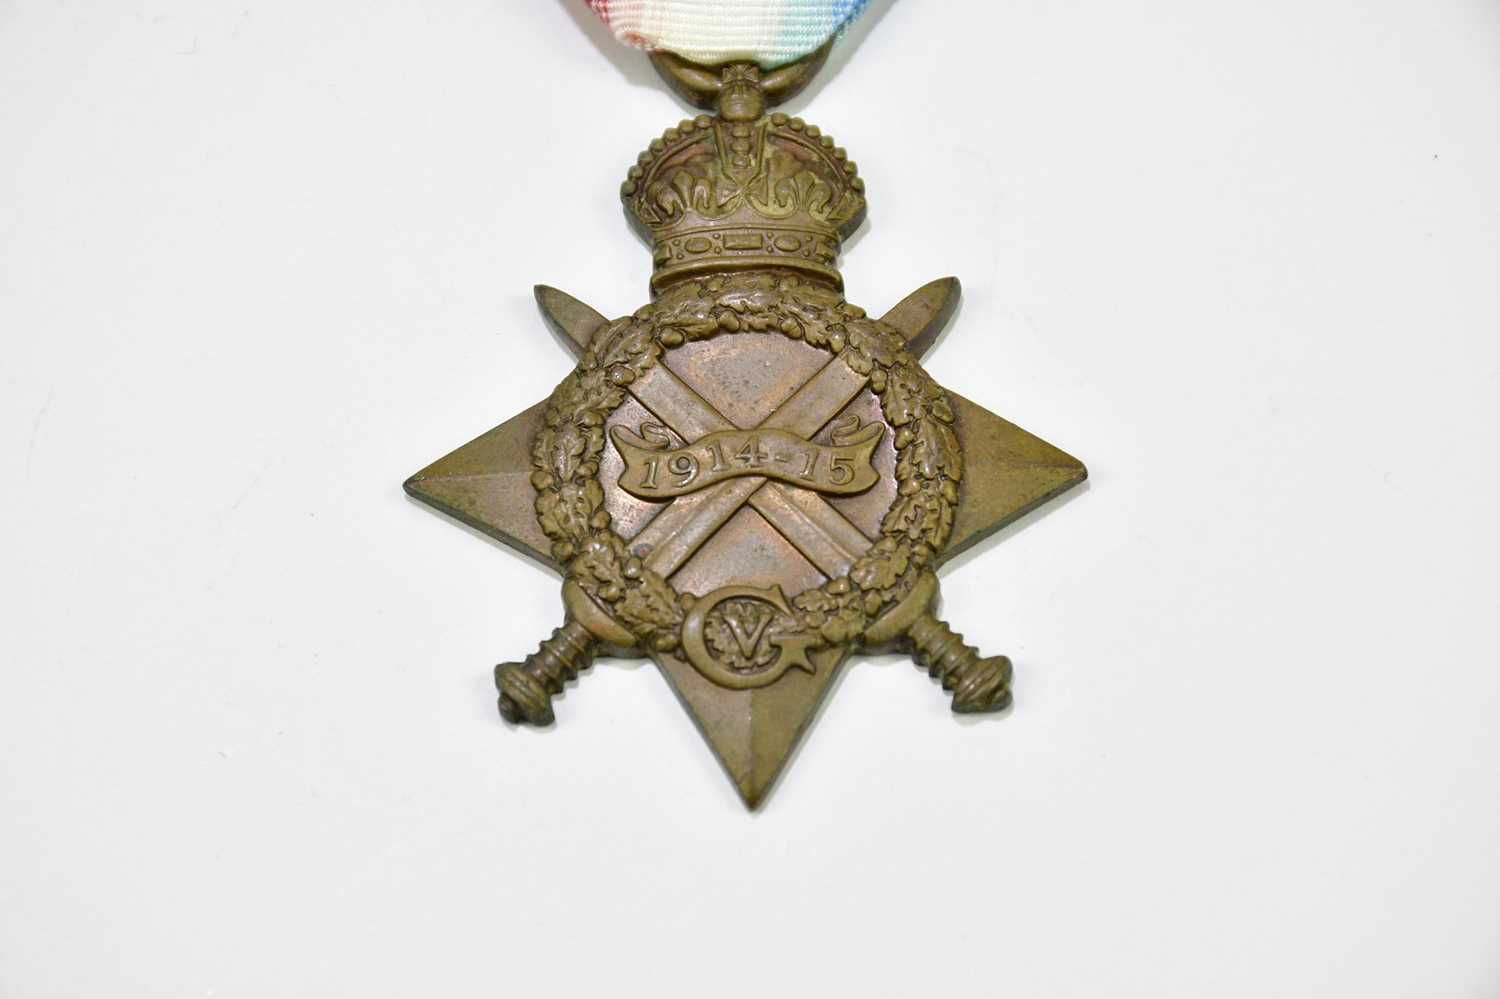 WWI War and Victory Medals, possibly awarded to brothers, the War Medal named to Pte G. Capper - Image 10 of 11